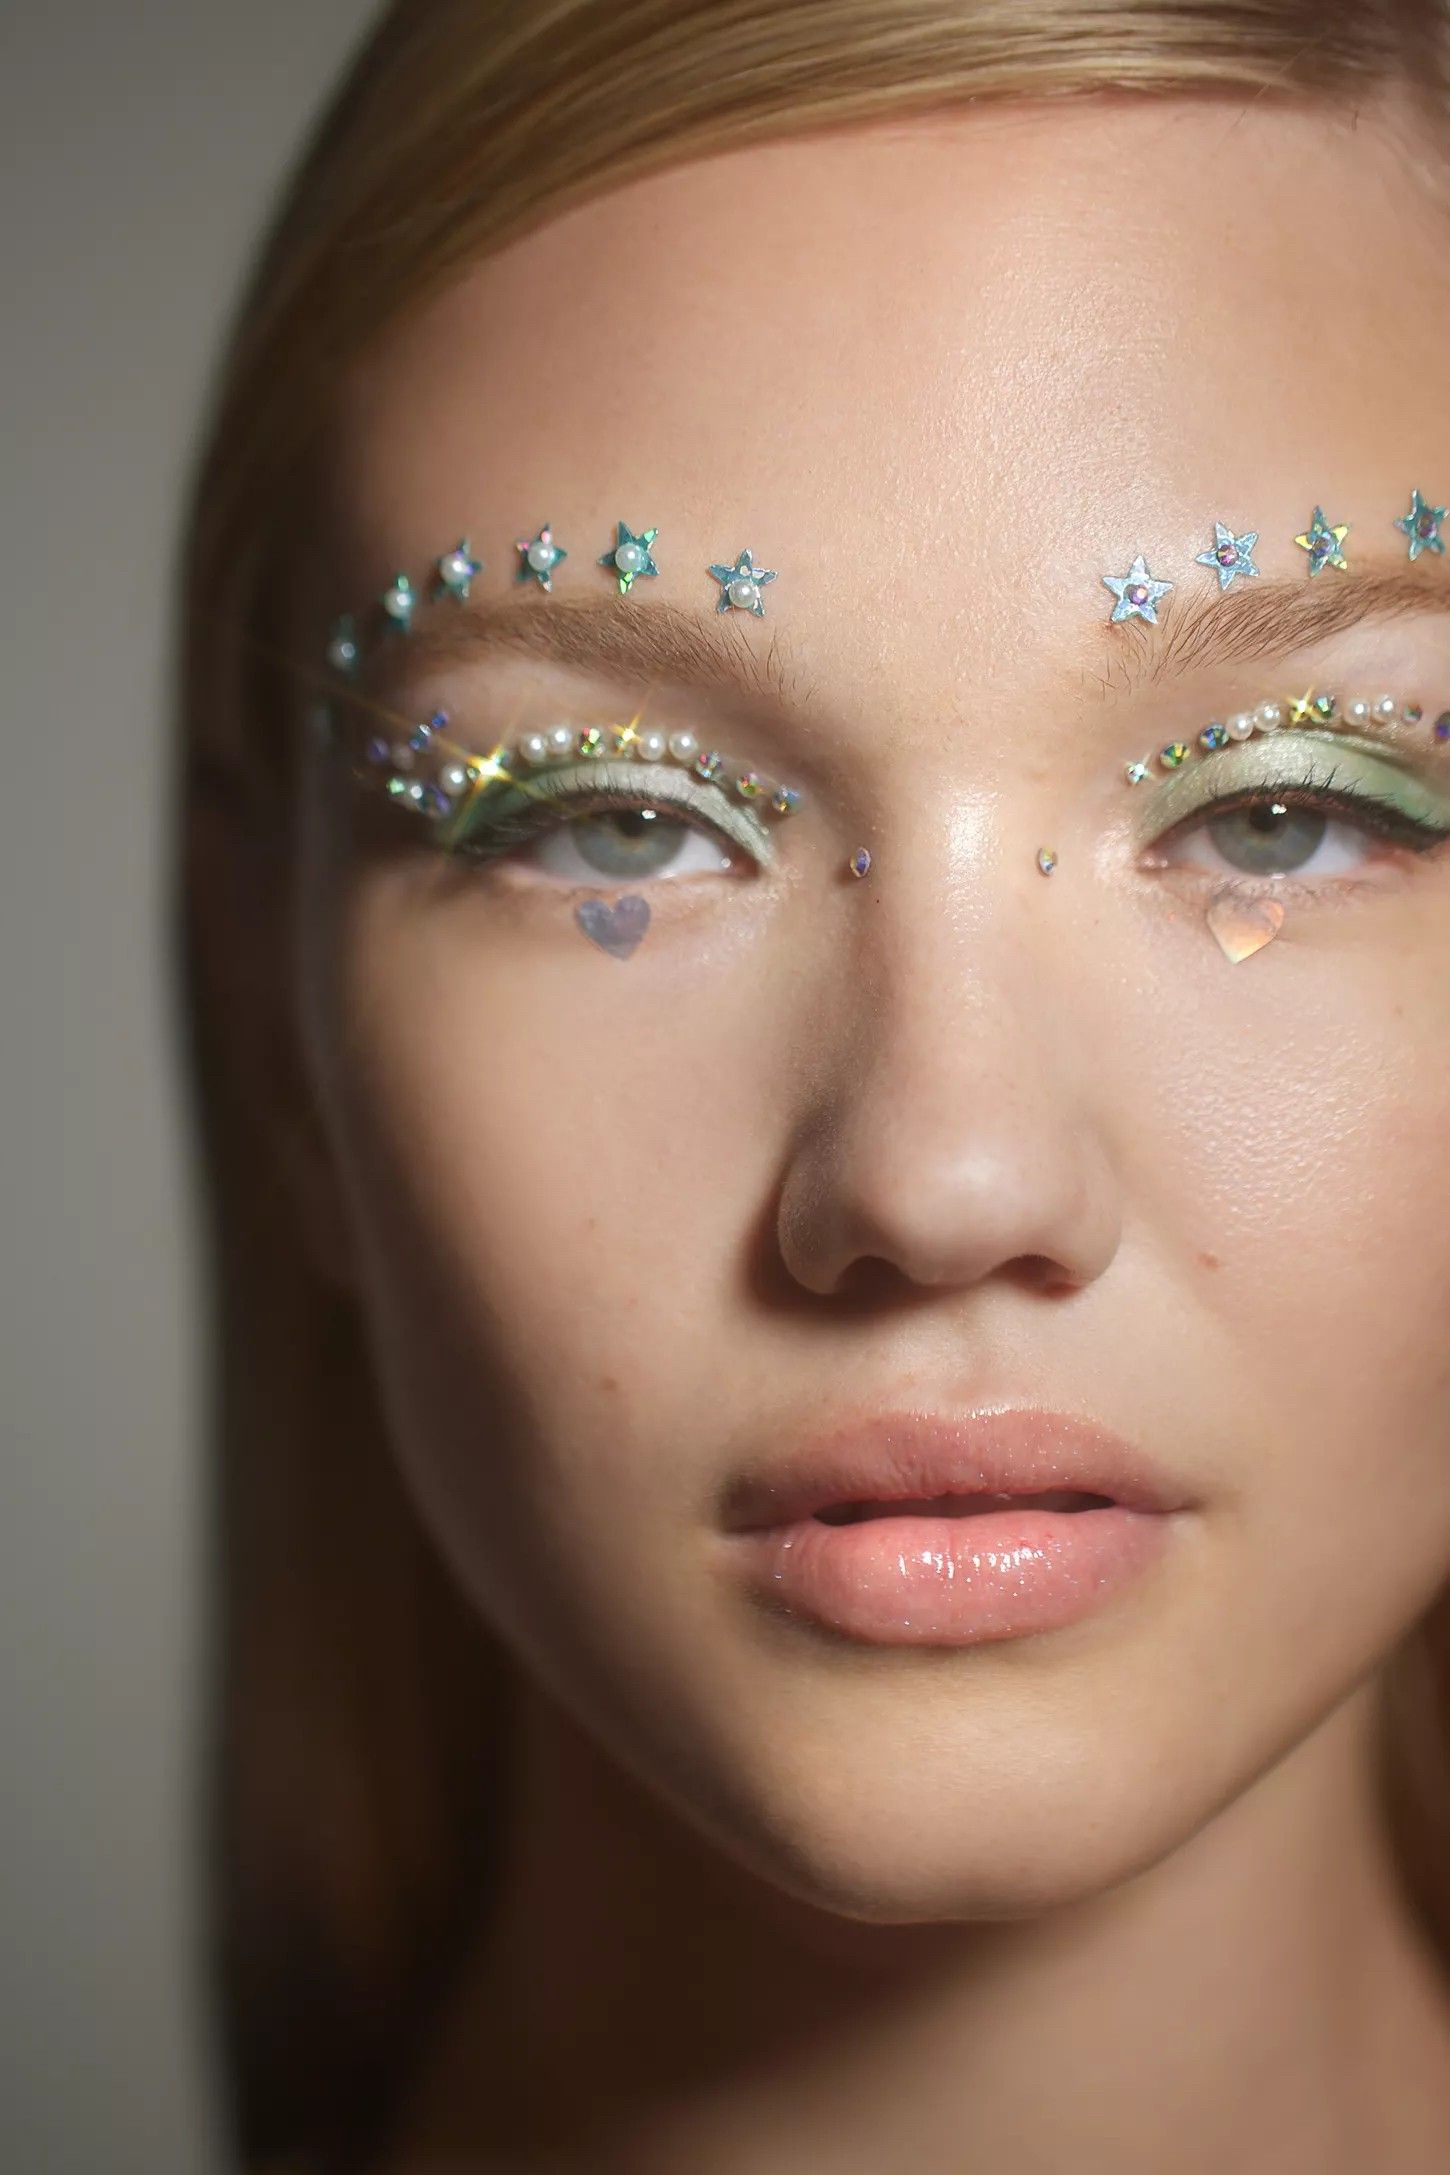 How to Accessorize Your Eyes with Bling!